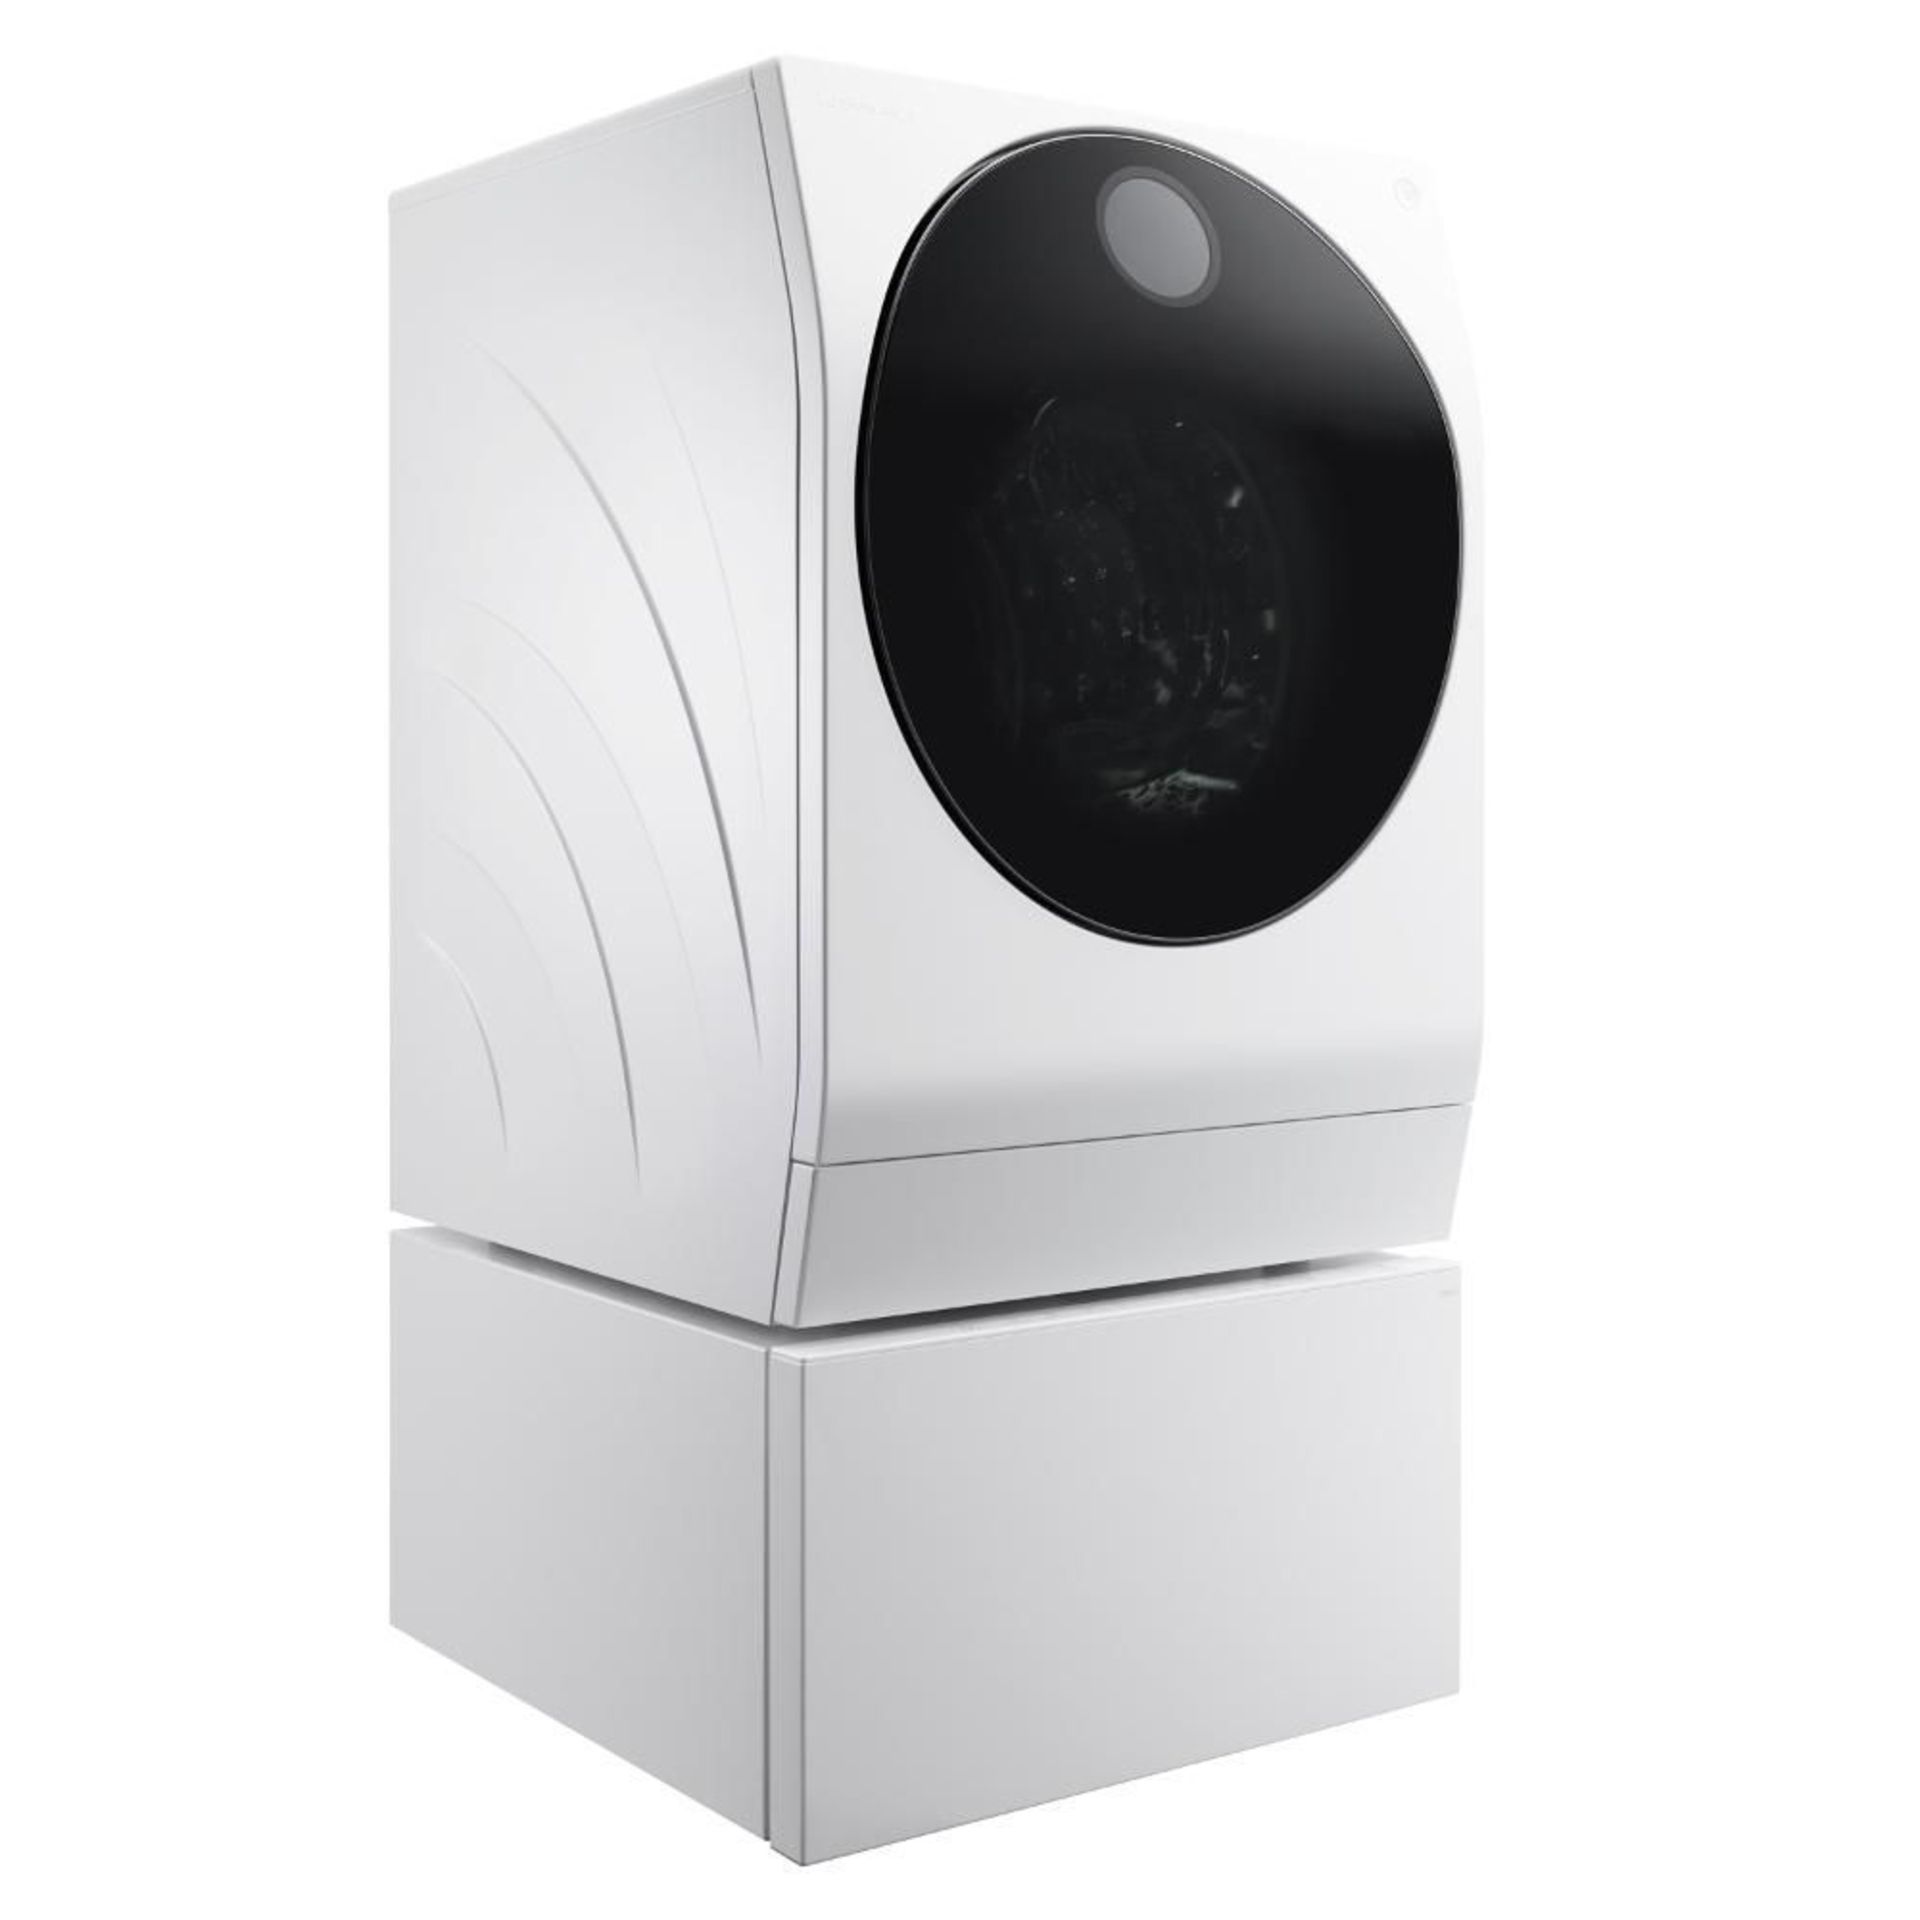 1 LG LSF100W SIGNATURE 12KG TWINWASH WASHING MACHINE WITH CENTUM SYSTEM RRP Â£1699 (POWERS ON)